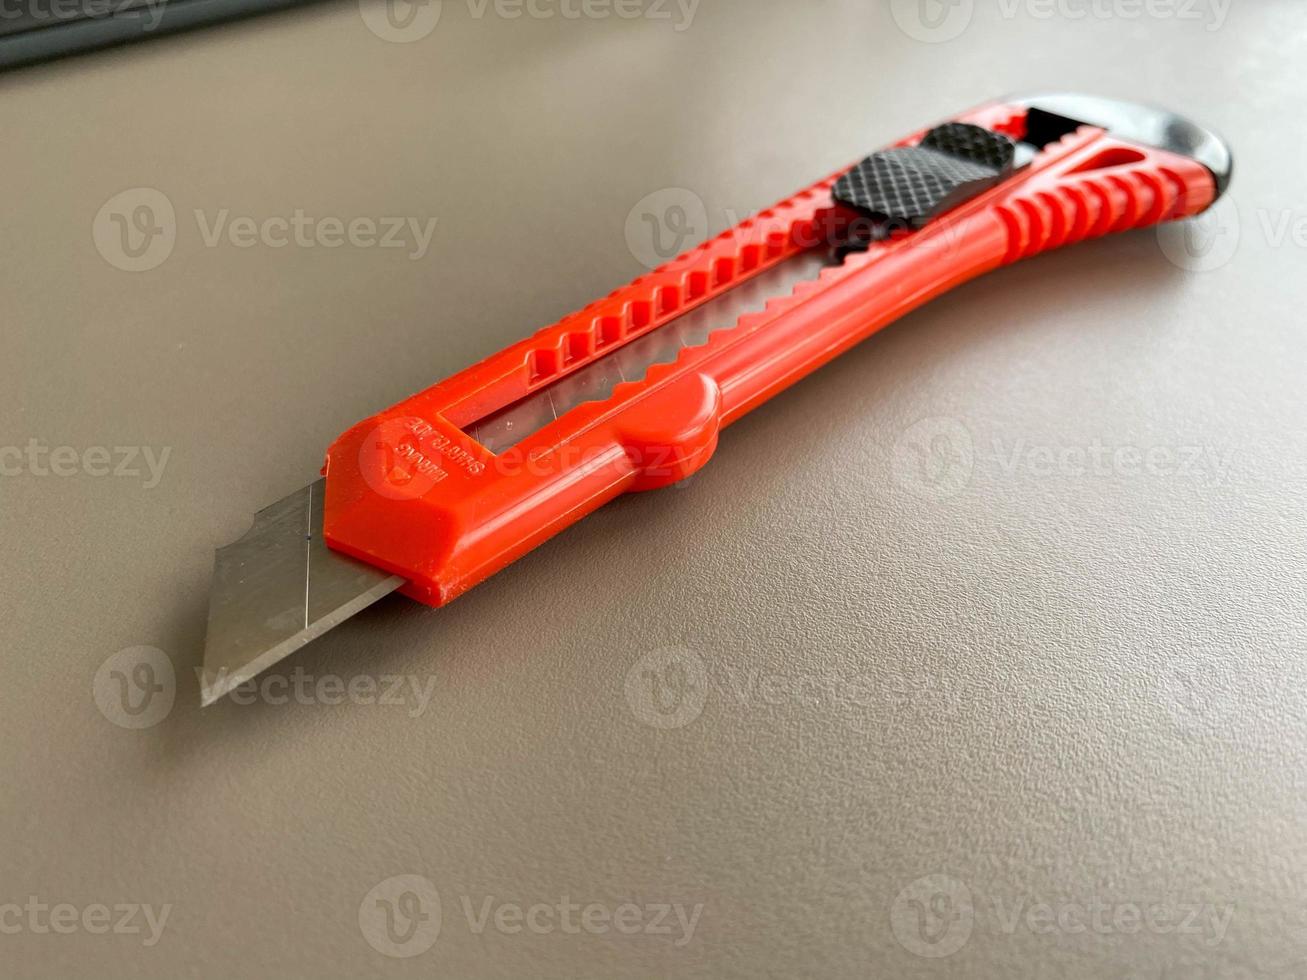 Red sharp office stationery knife with a paper cutting blade on a desktop office desk. Business work photo